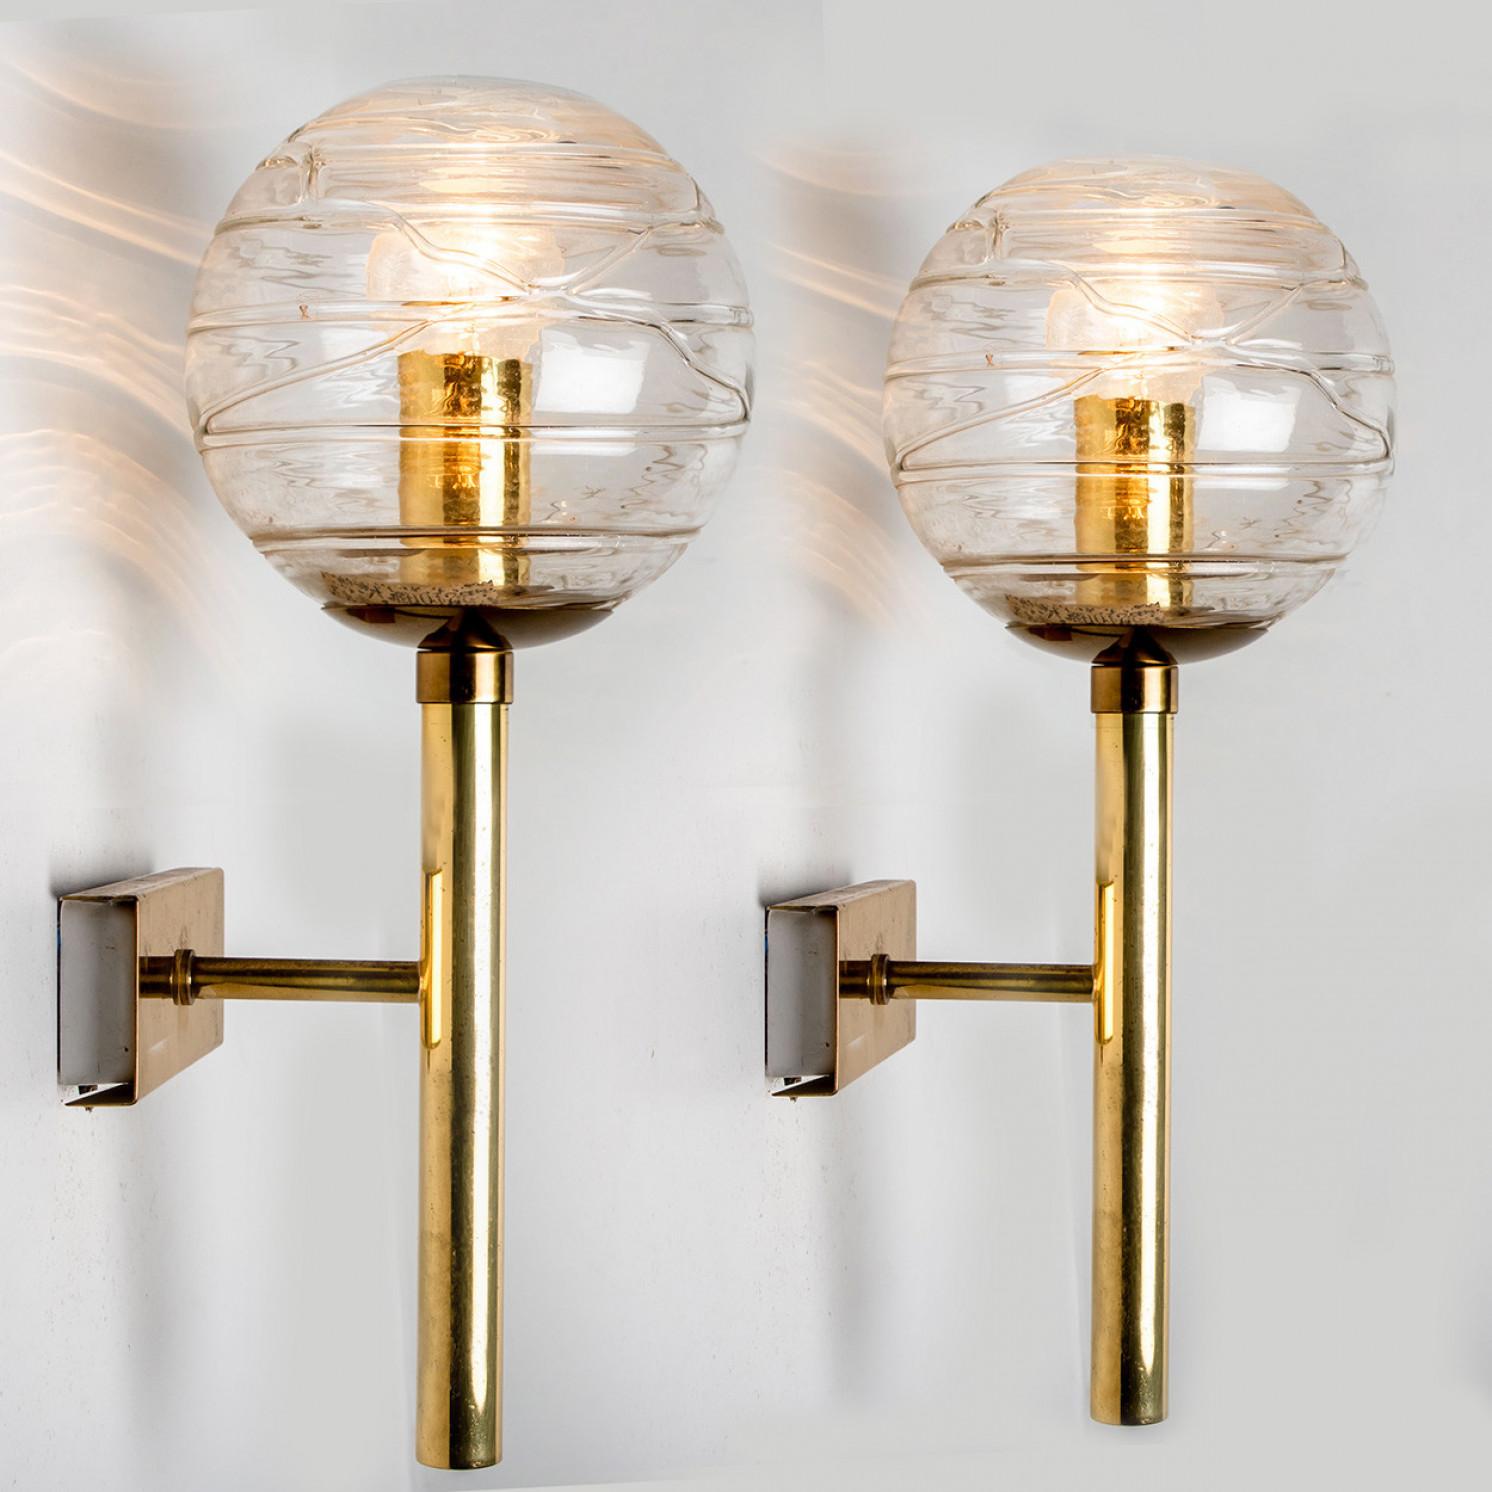 Pair of Murano Clear Glass and Brass Wall Lights by Doria Leuchten, 1960s For Sale 3